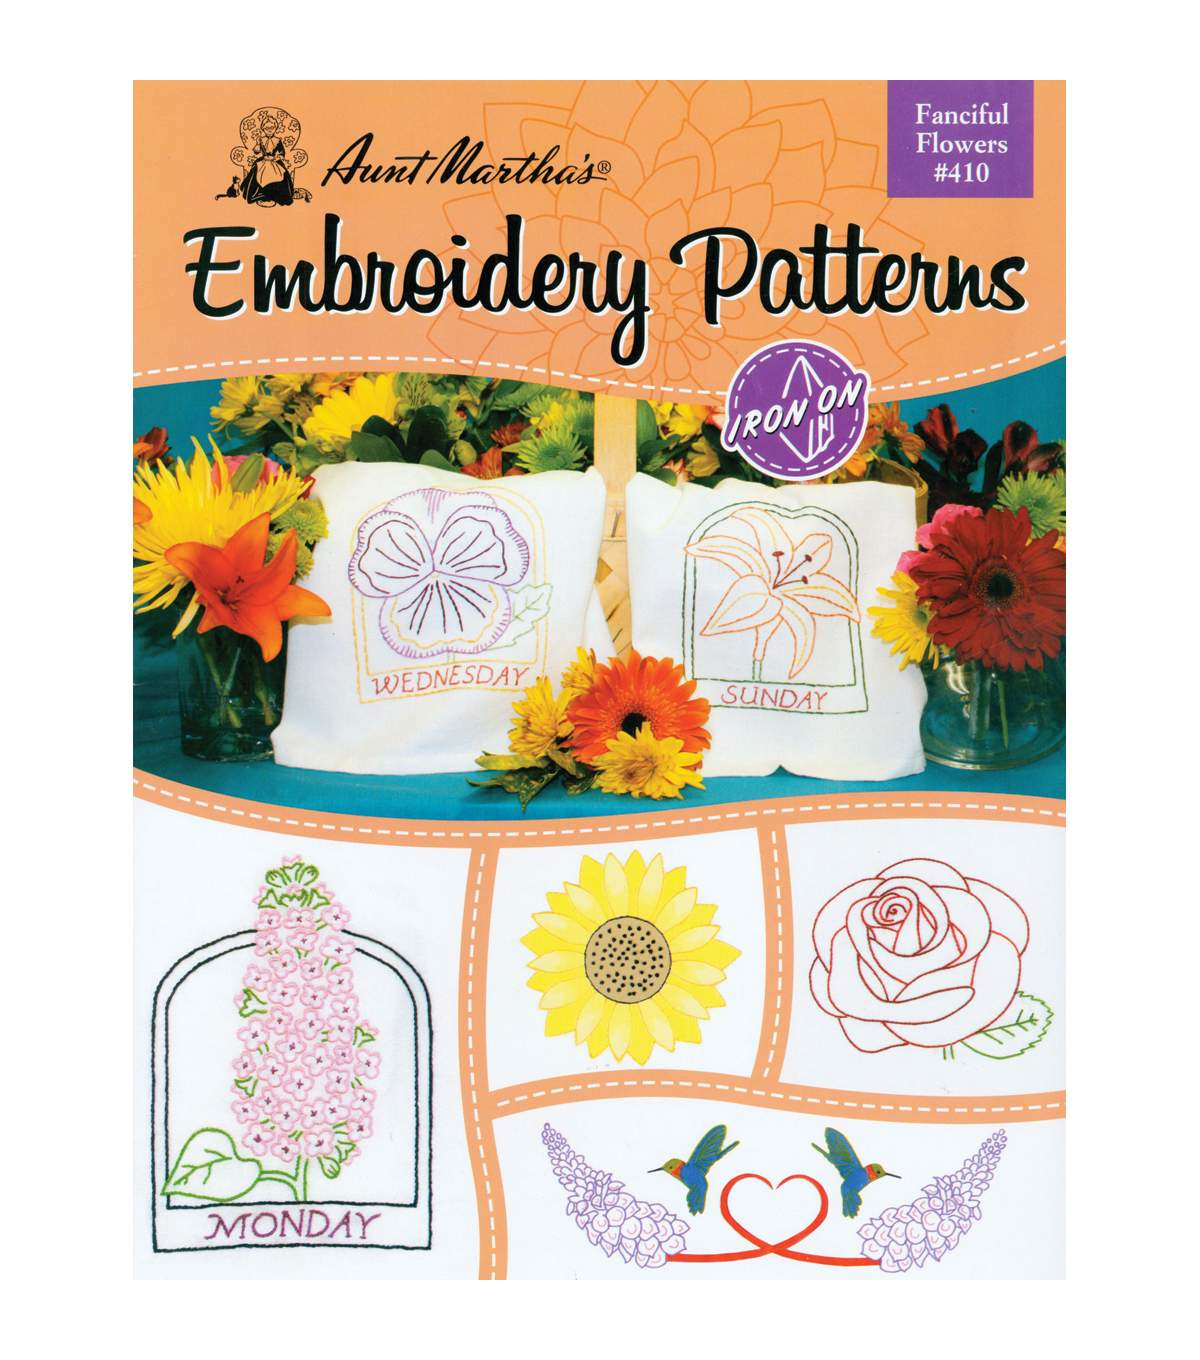 Embroidery Iron On Patterns Aunt Marthas Colonial Patterns Iron On Transfer Books Fanciful Flowers